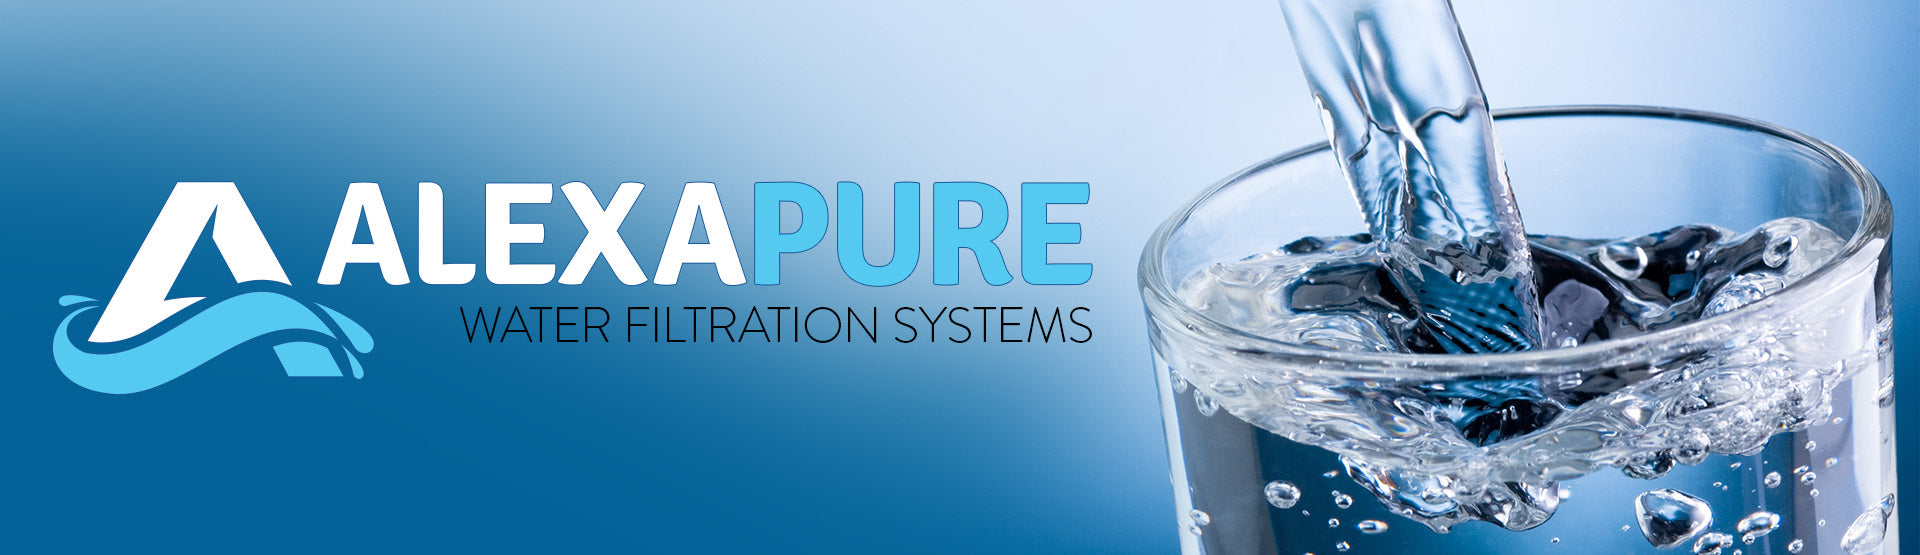 Find replacements or stock up on extra certified water filters to ensure safer water at all times.